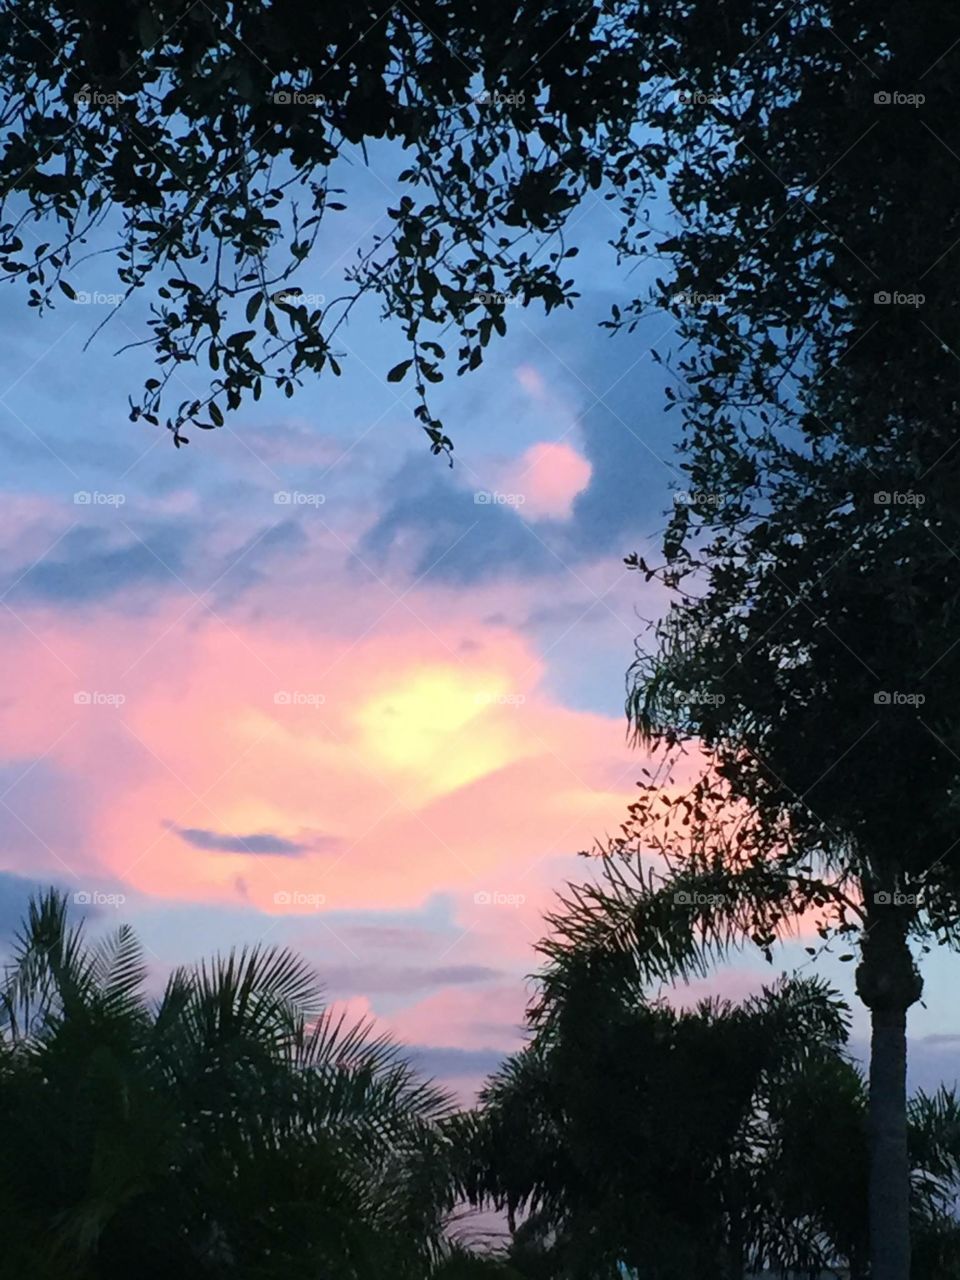 Sunset. Palm trees. Live Oak. Sky. Clouds. Colorful. Peaceful. Serenity. 